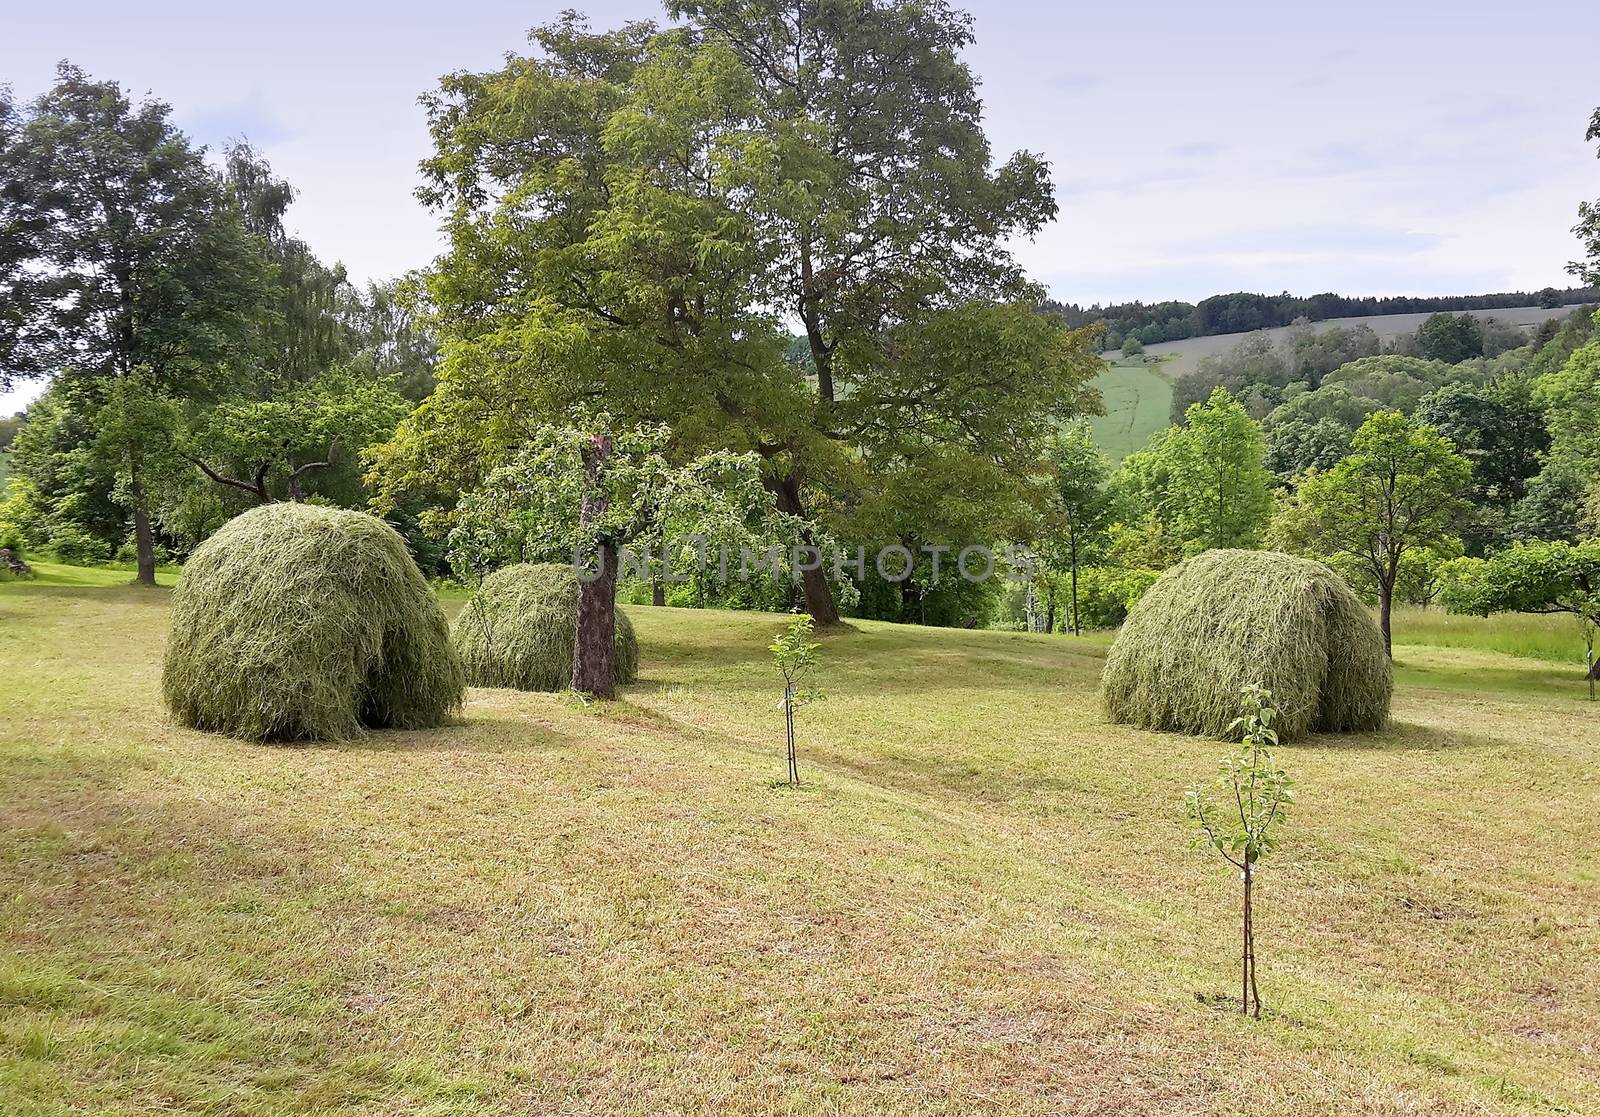 Rural scenery of country garden with haystacks made after cut grass and raking hay.